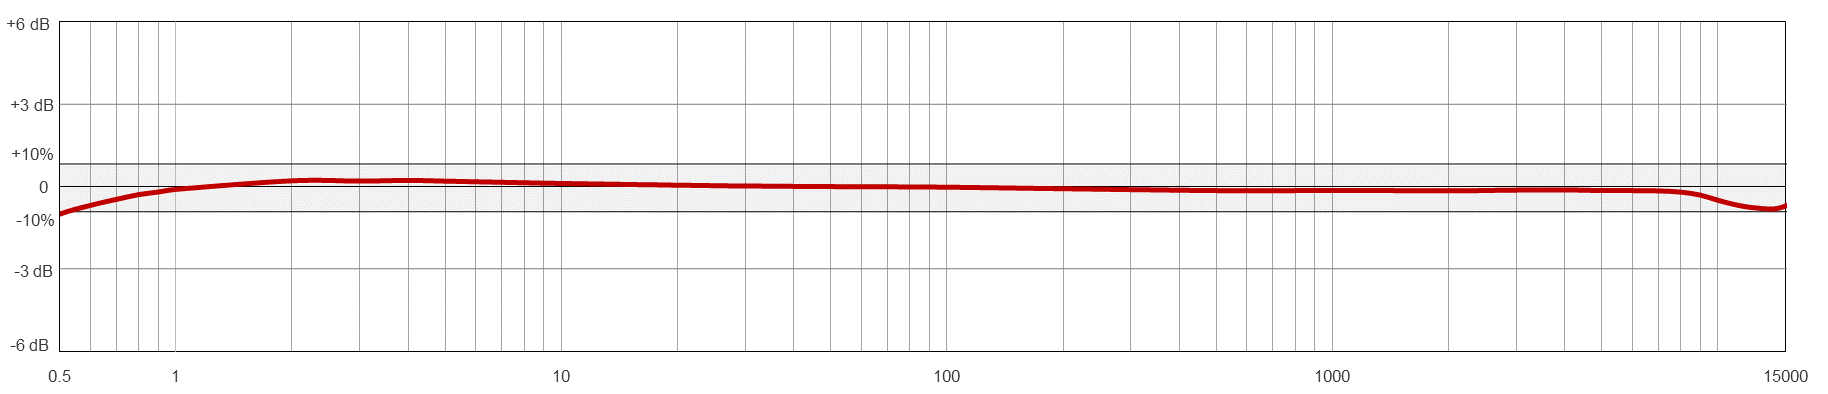 A line graph showing the frequency resopnse of a CTC AC202 condition monitoring sensor.